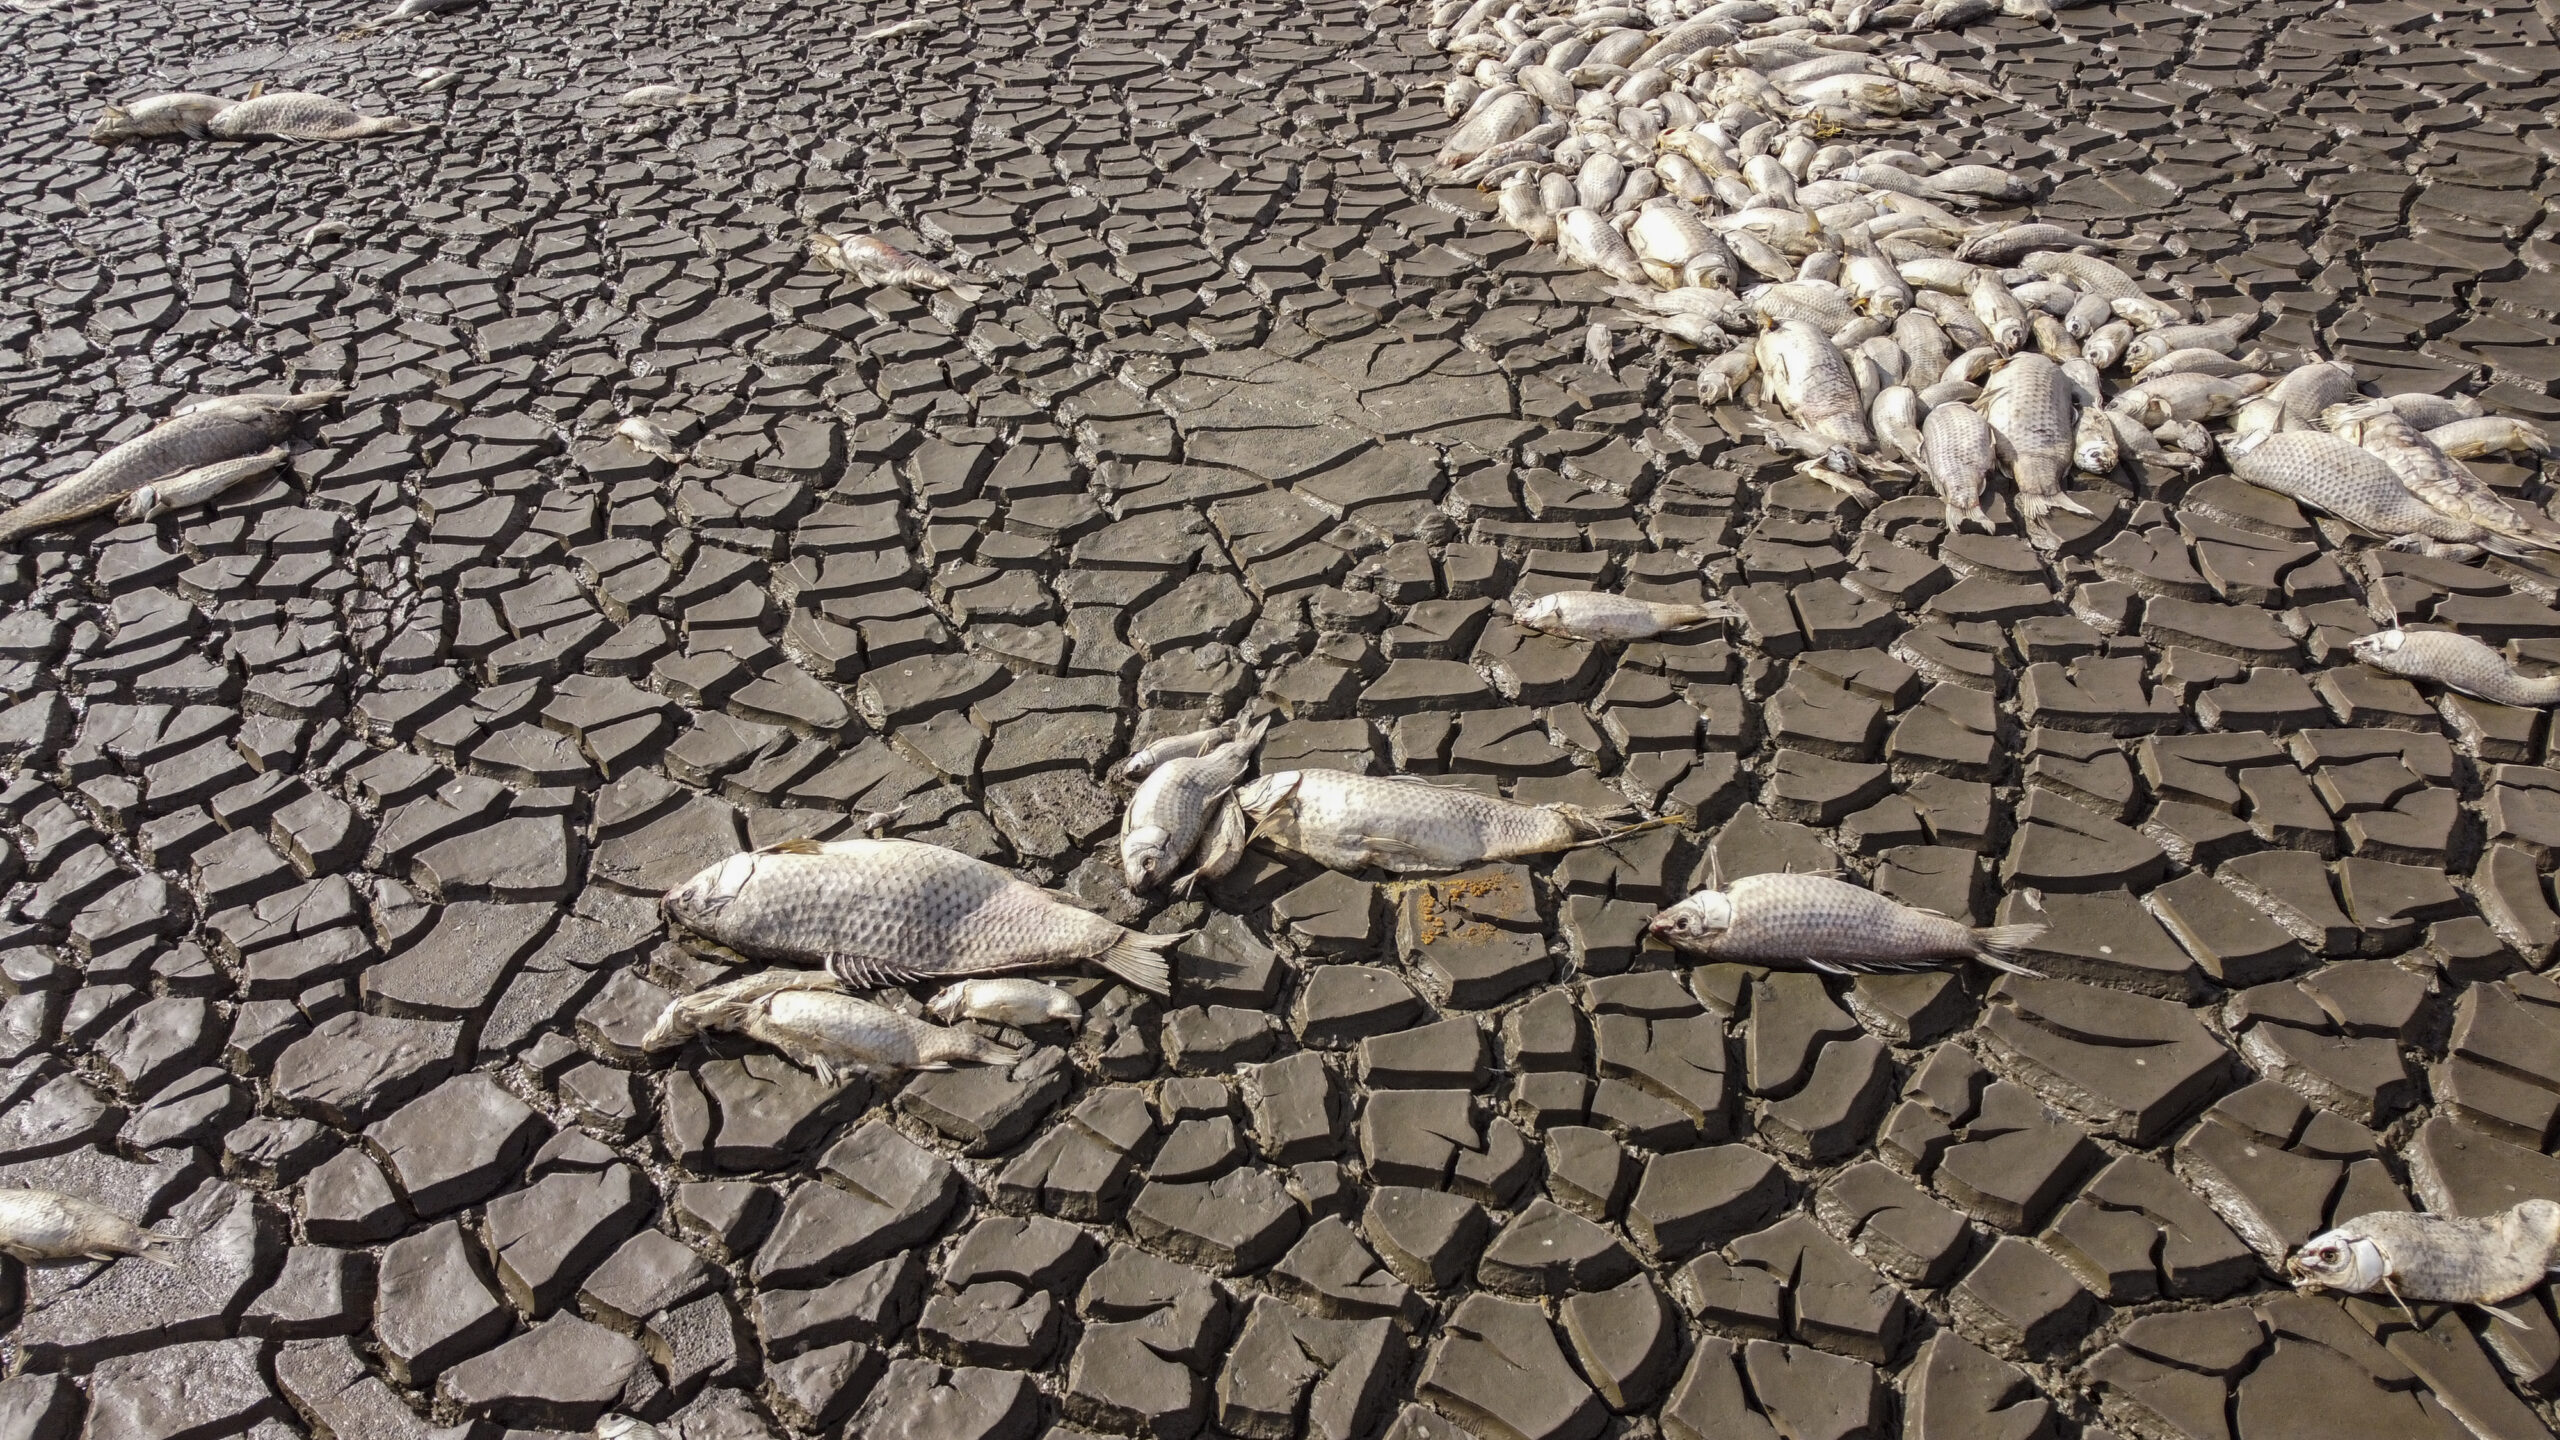 Thousands of fish dead 